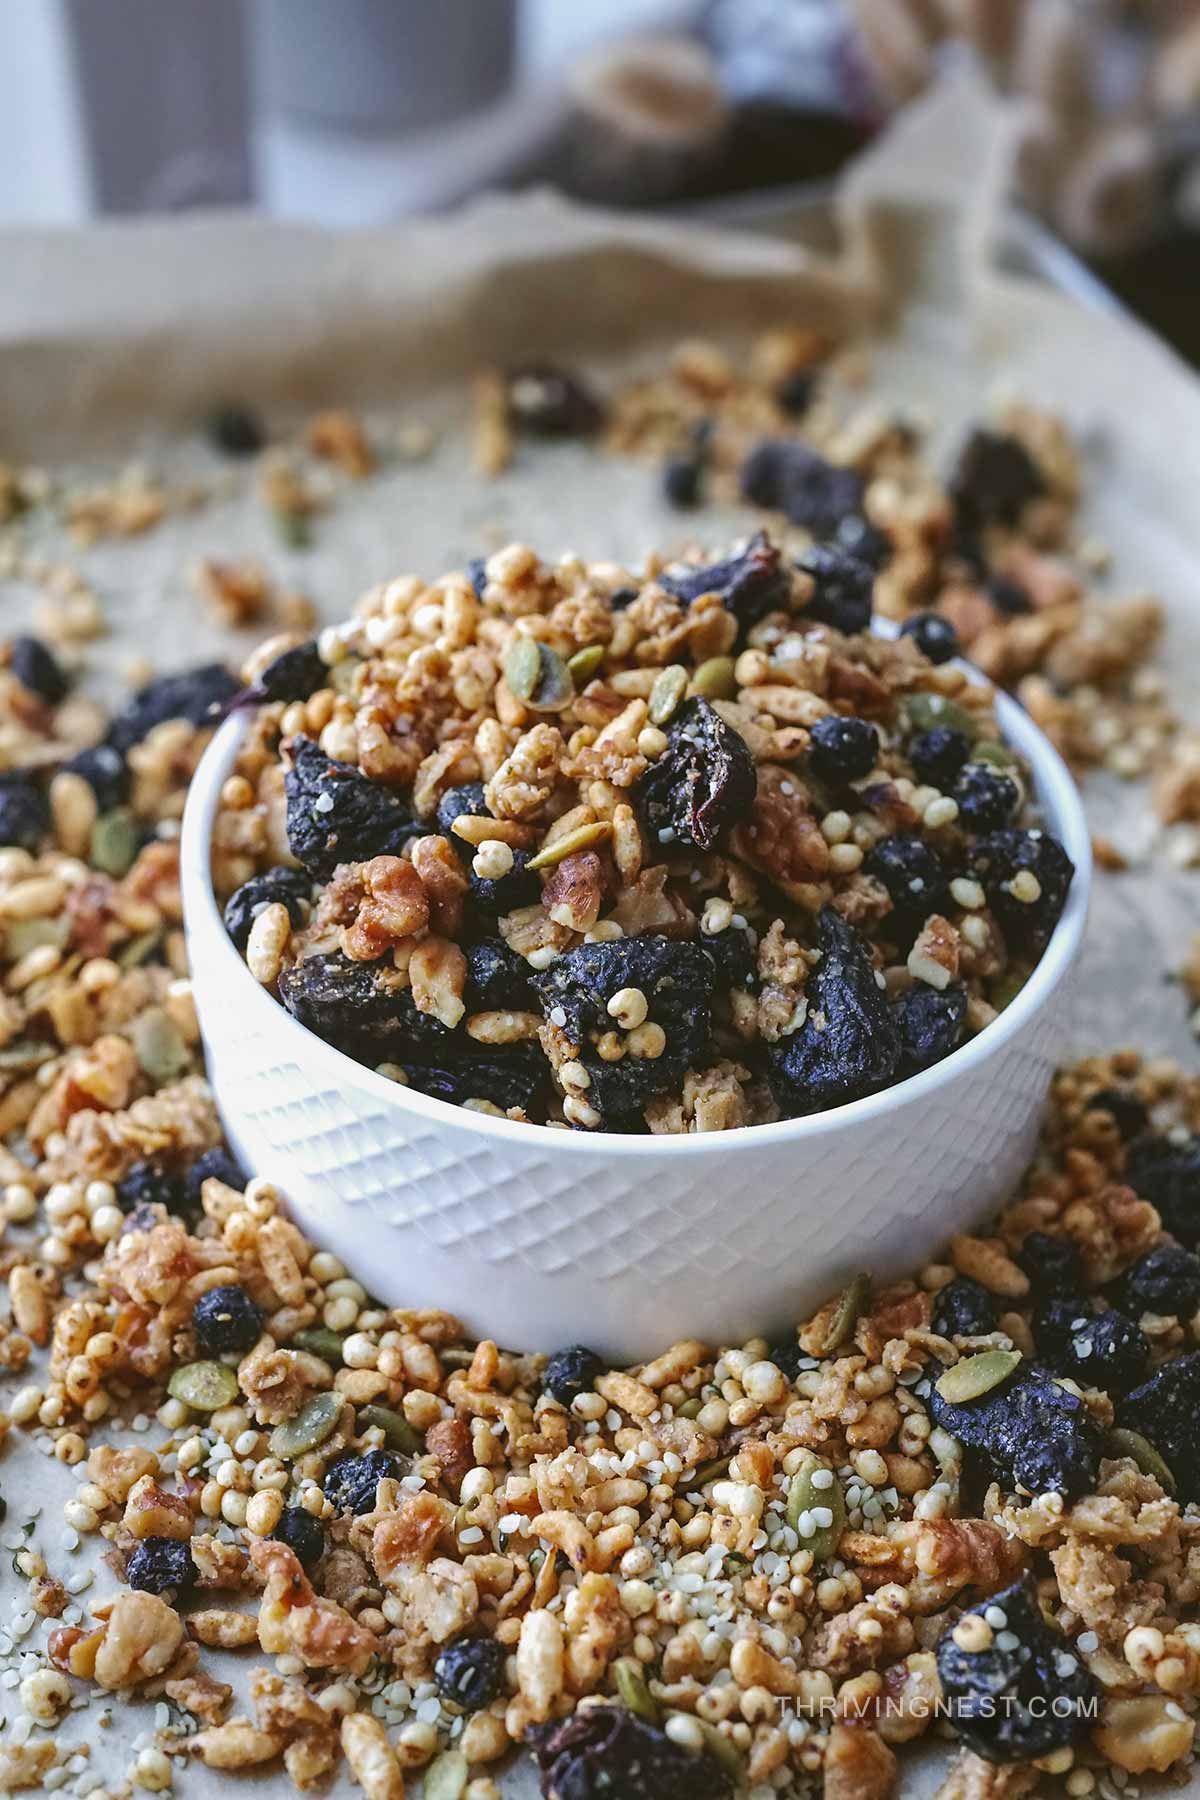 Homemade kid friendly granola, made with puffed grains appealing for toddlers too, presented in a bowl.